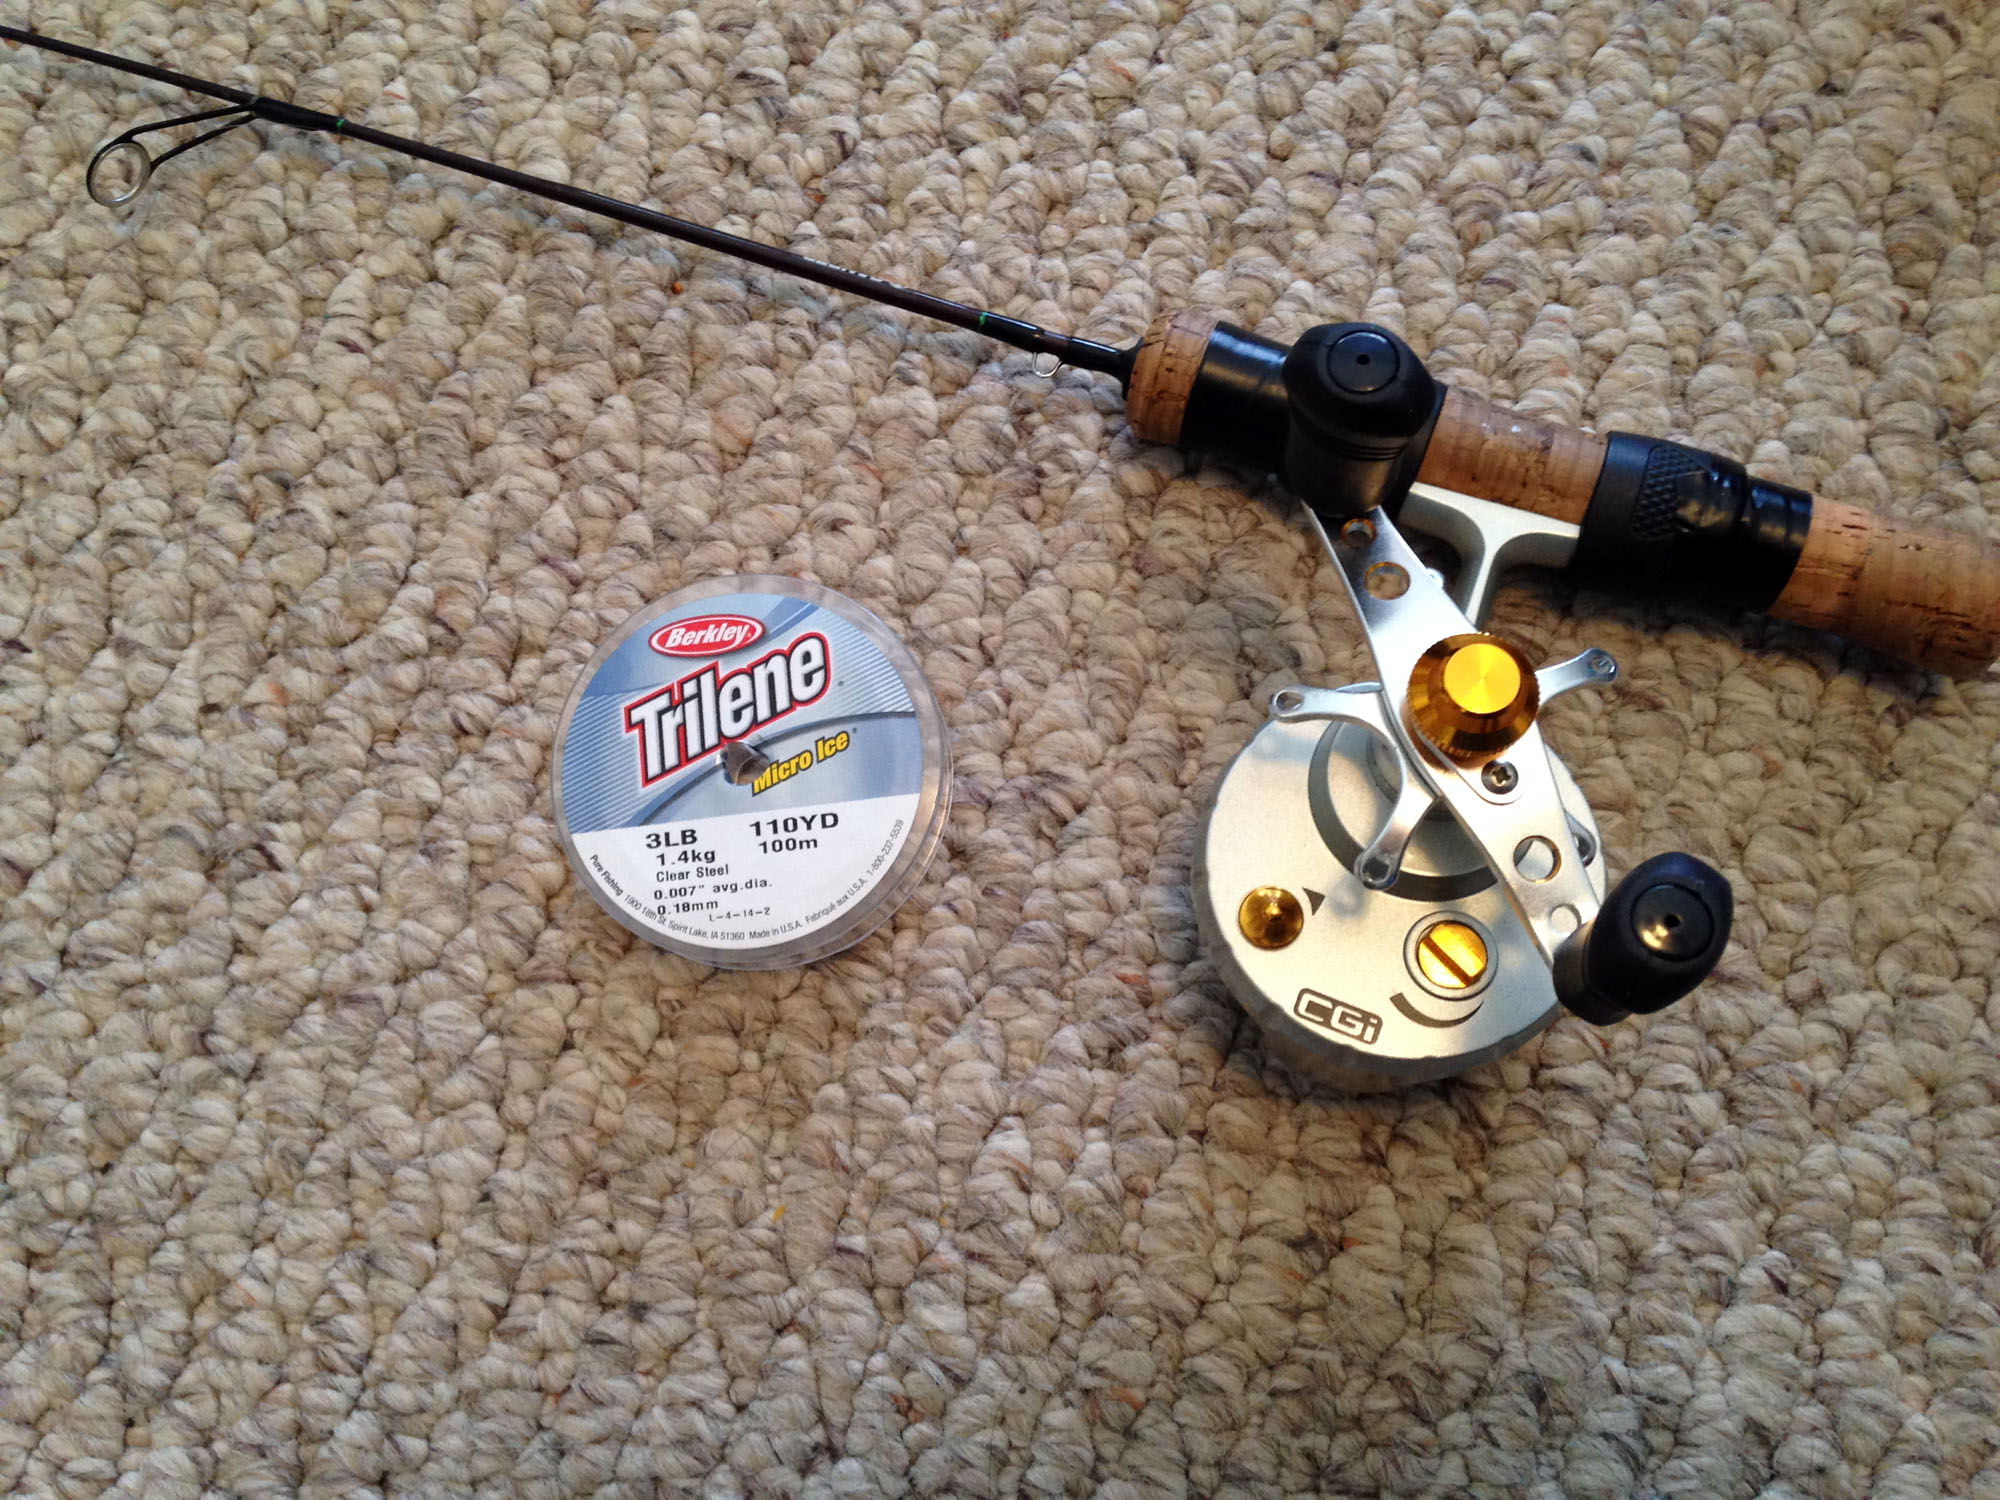 How to Spool an Inline Ice Fishing Reel! 